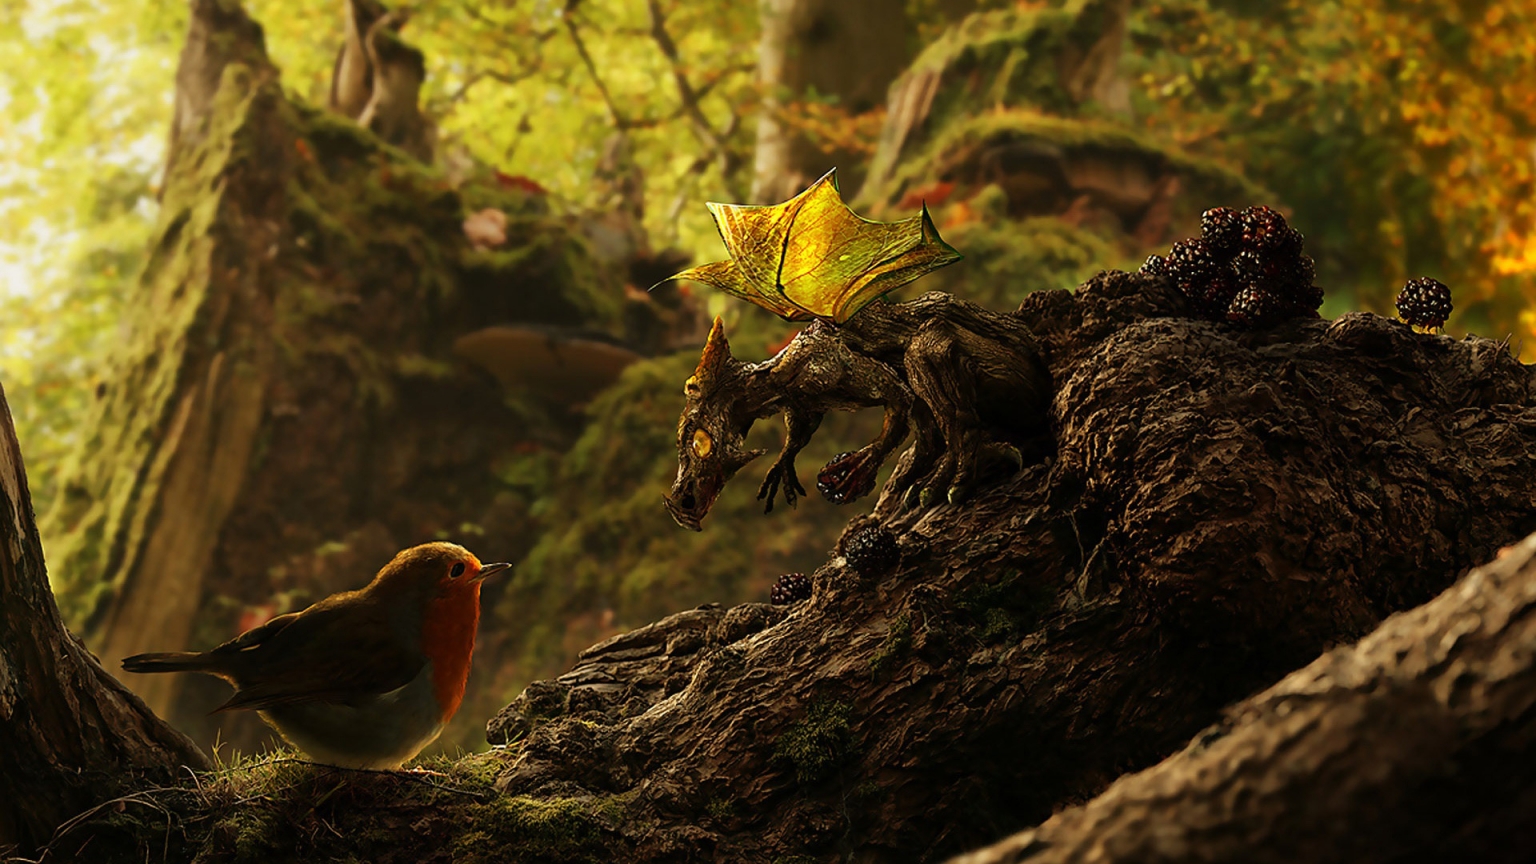 The Amber Dragons for 1536 x 864 HDTV resolution